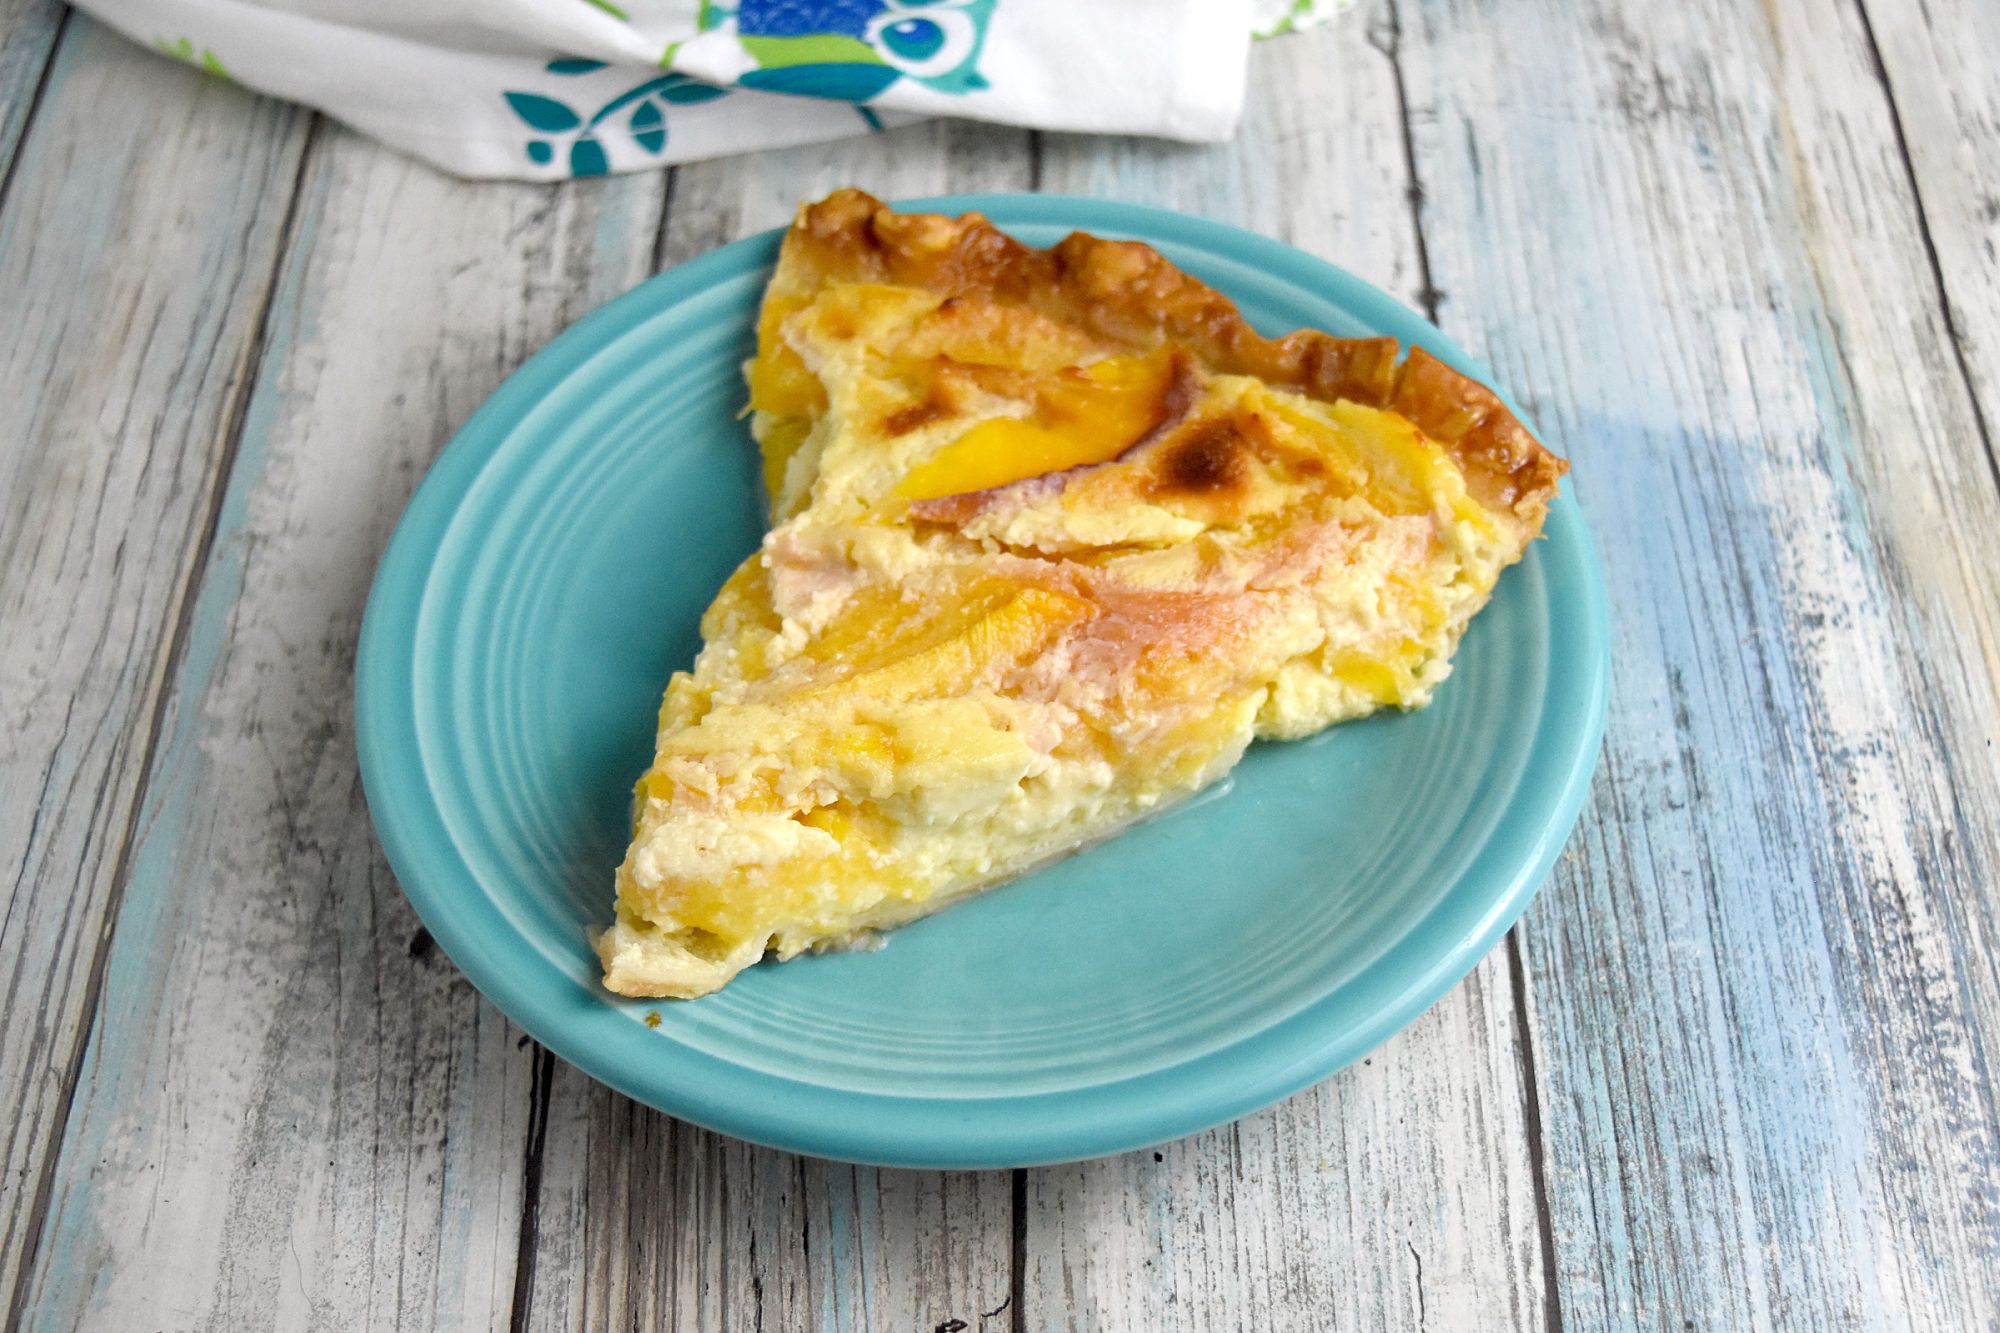 Fresh Peach Custard Pie has summer sweet peaches surrounded by a creamy sweet custard filling. The ingredients are simple but combine to make an irresistible pie your family will love. #custardpie #freshpeaches #inseasonpeaches #OhSayCanYouEB #sponsored #onlyfeedmeEB #madewithEB @egglandsbest
